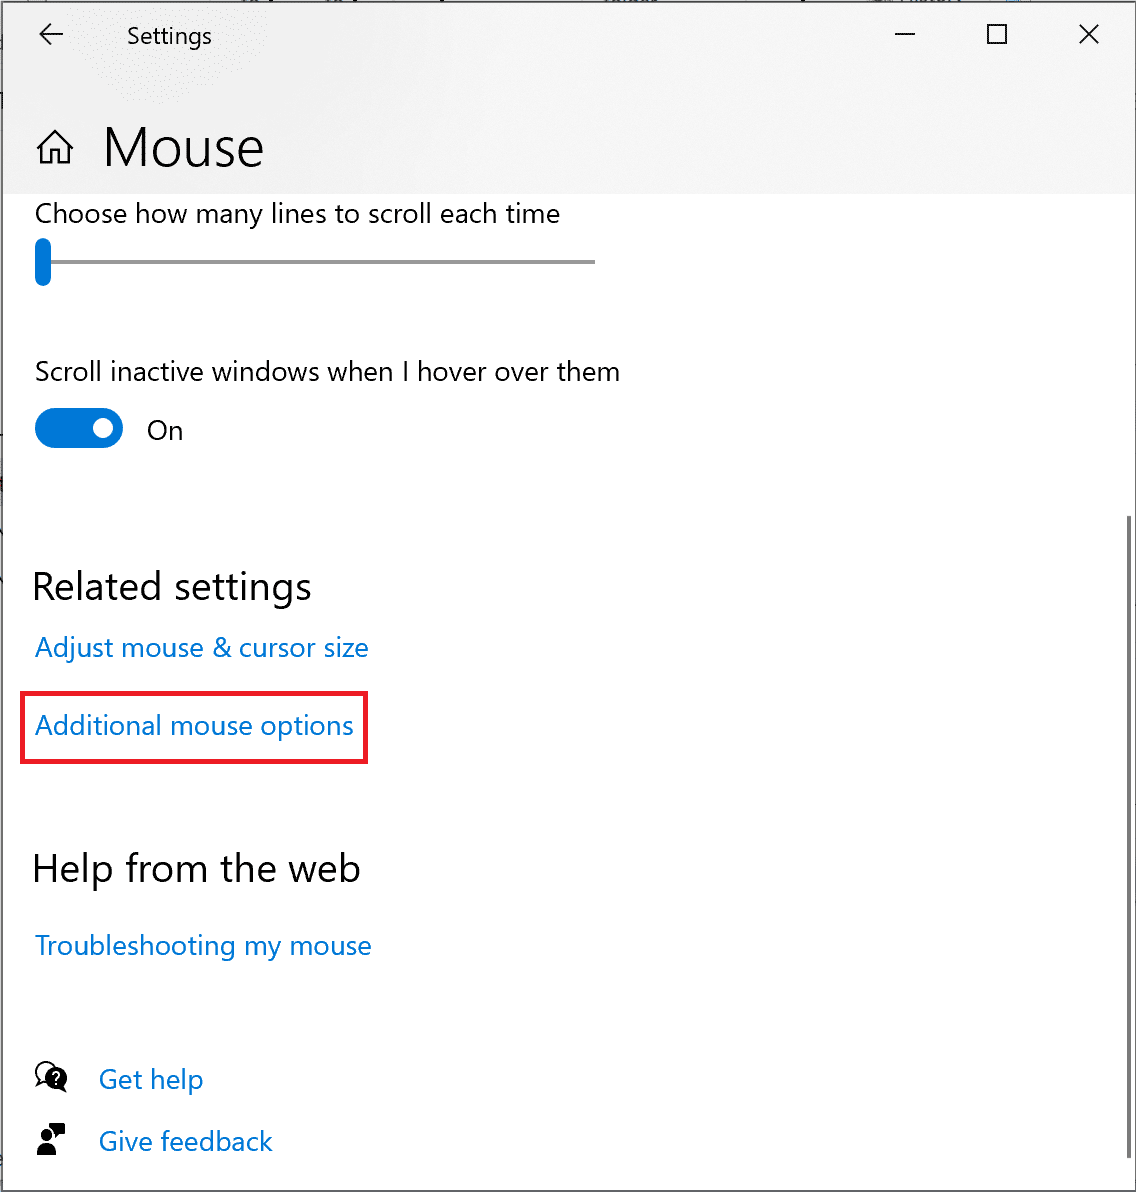 Select Additional mouse options